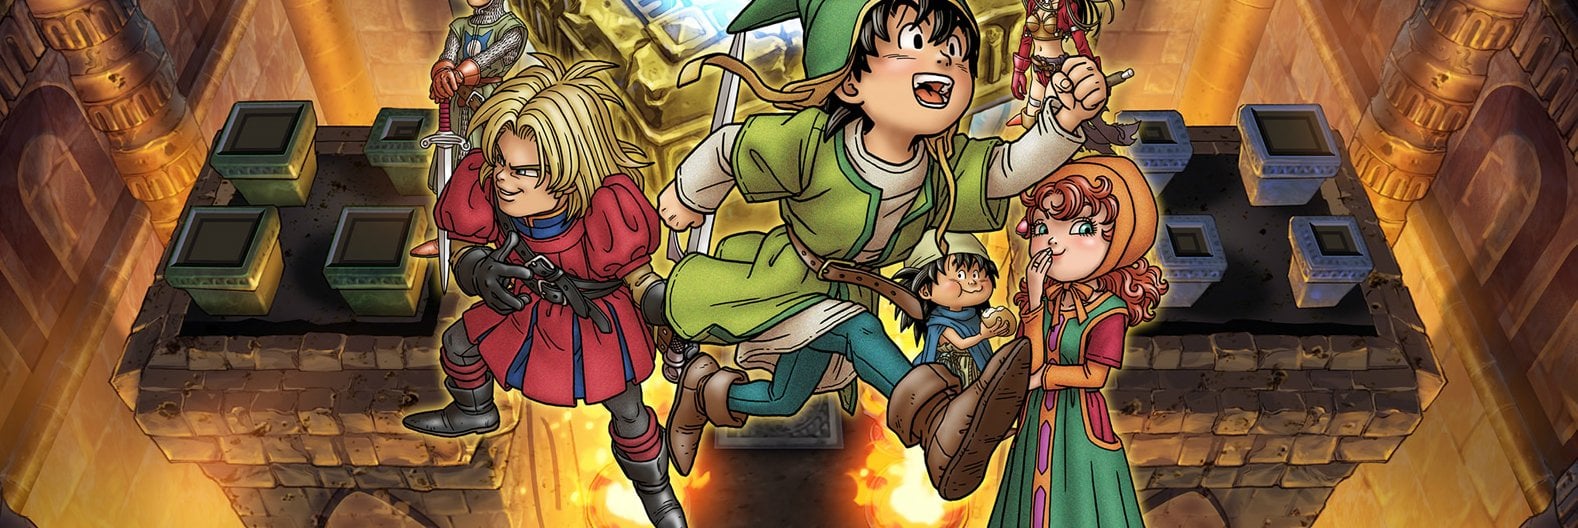 Review Dragon Quest Vii Fragments Of The Forgotten Past 3ds Destructoid